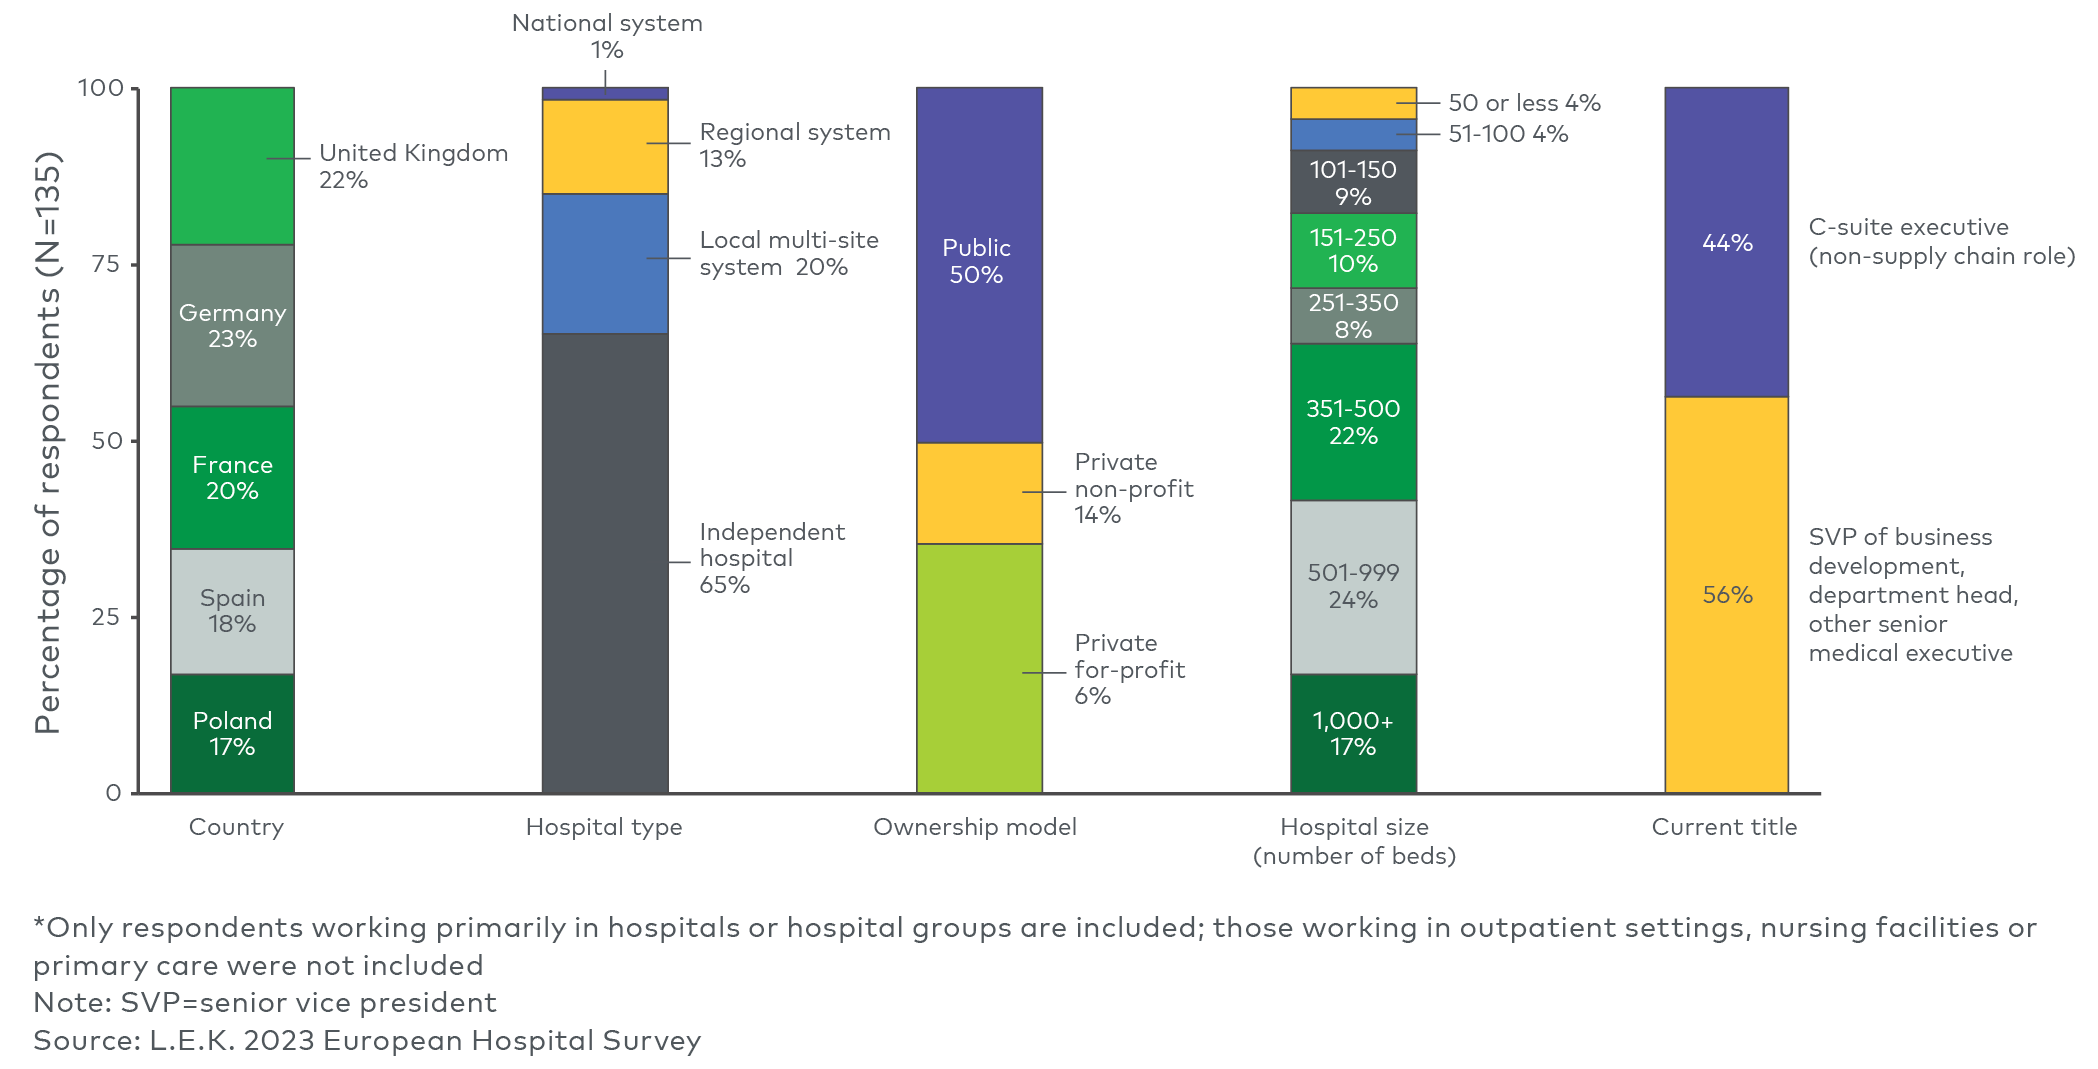 2023 European Hospital Survey respondent mix considered in this Executive Insights* 